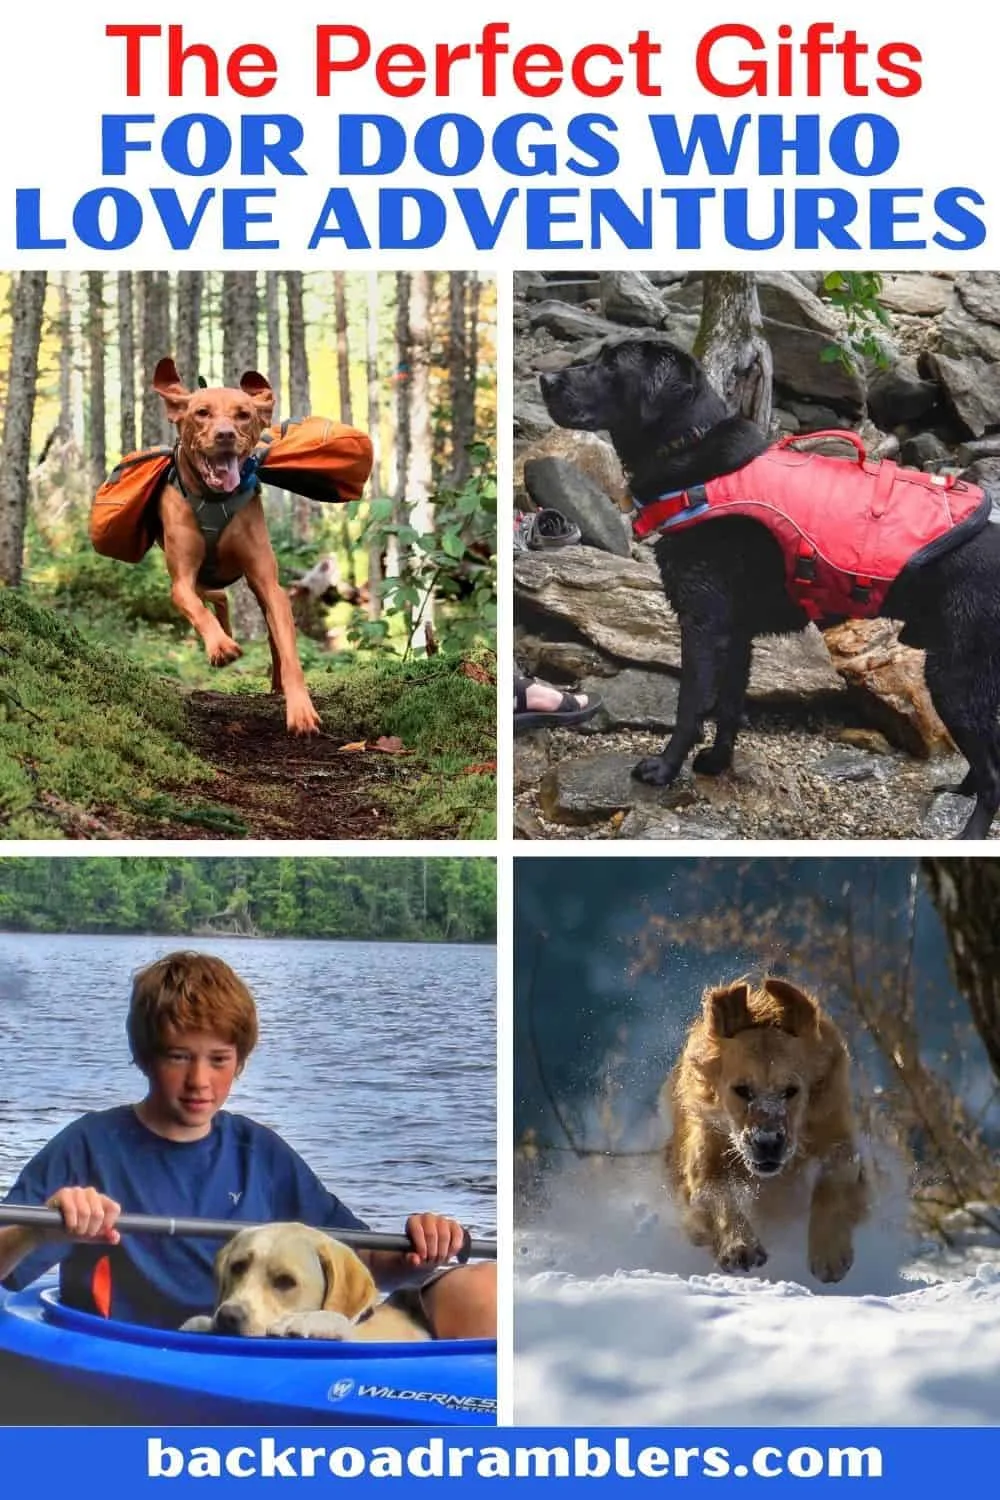 A collage of photos featuring adventurous dogs. Text overlay: The Perfect Gifts for Dogs who Love Adventures